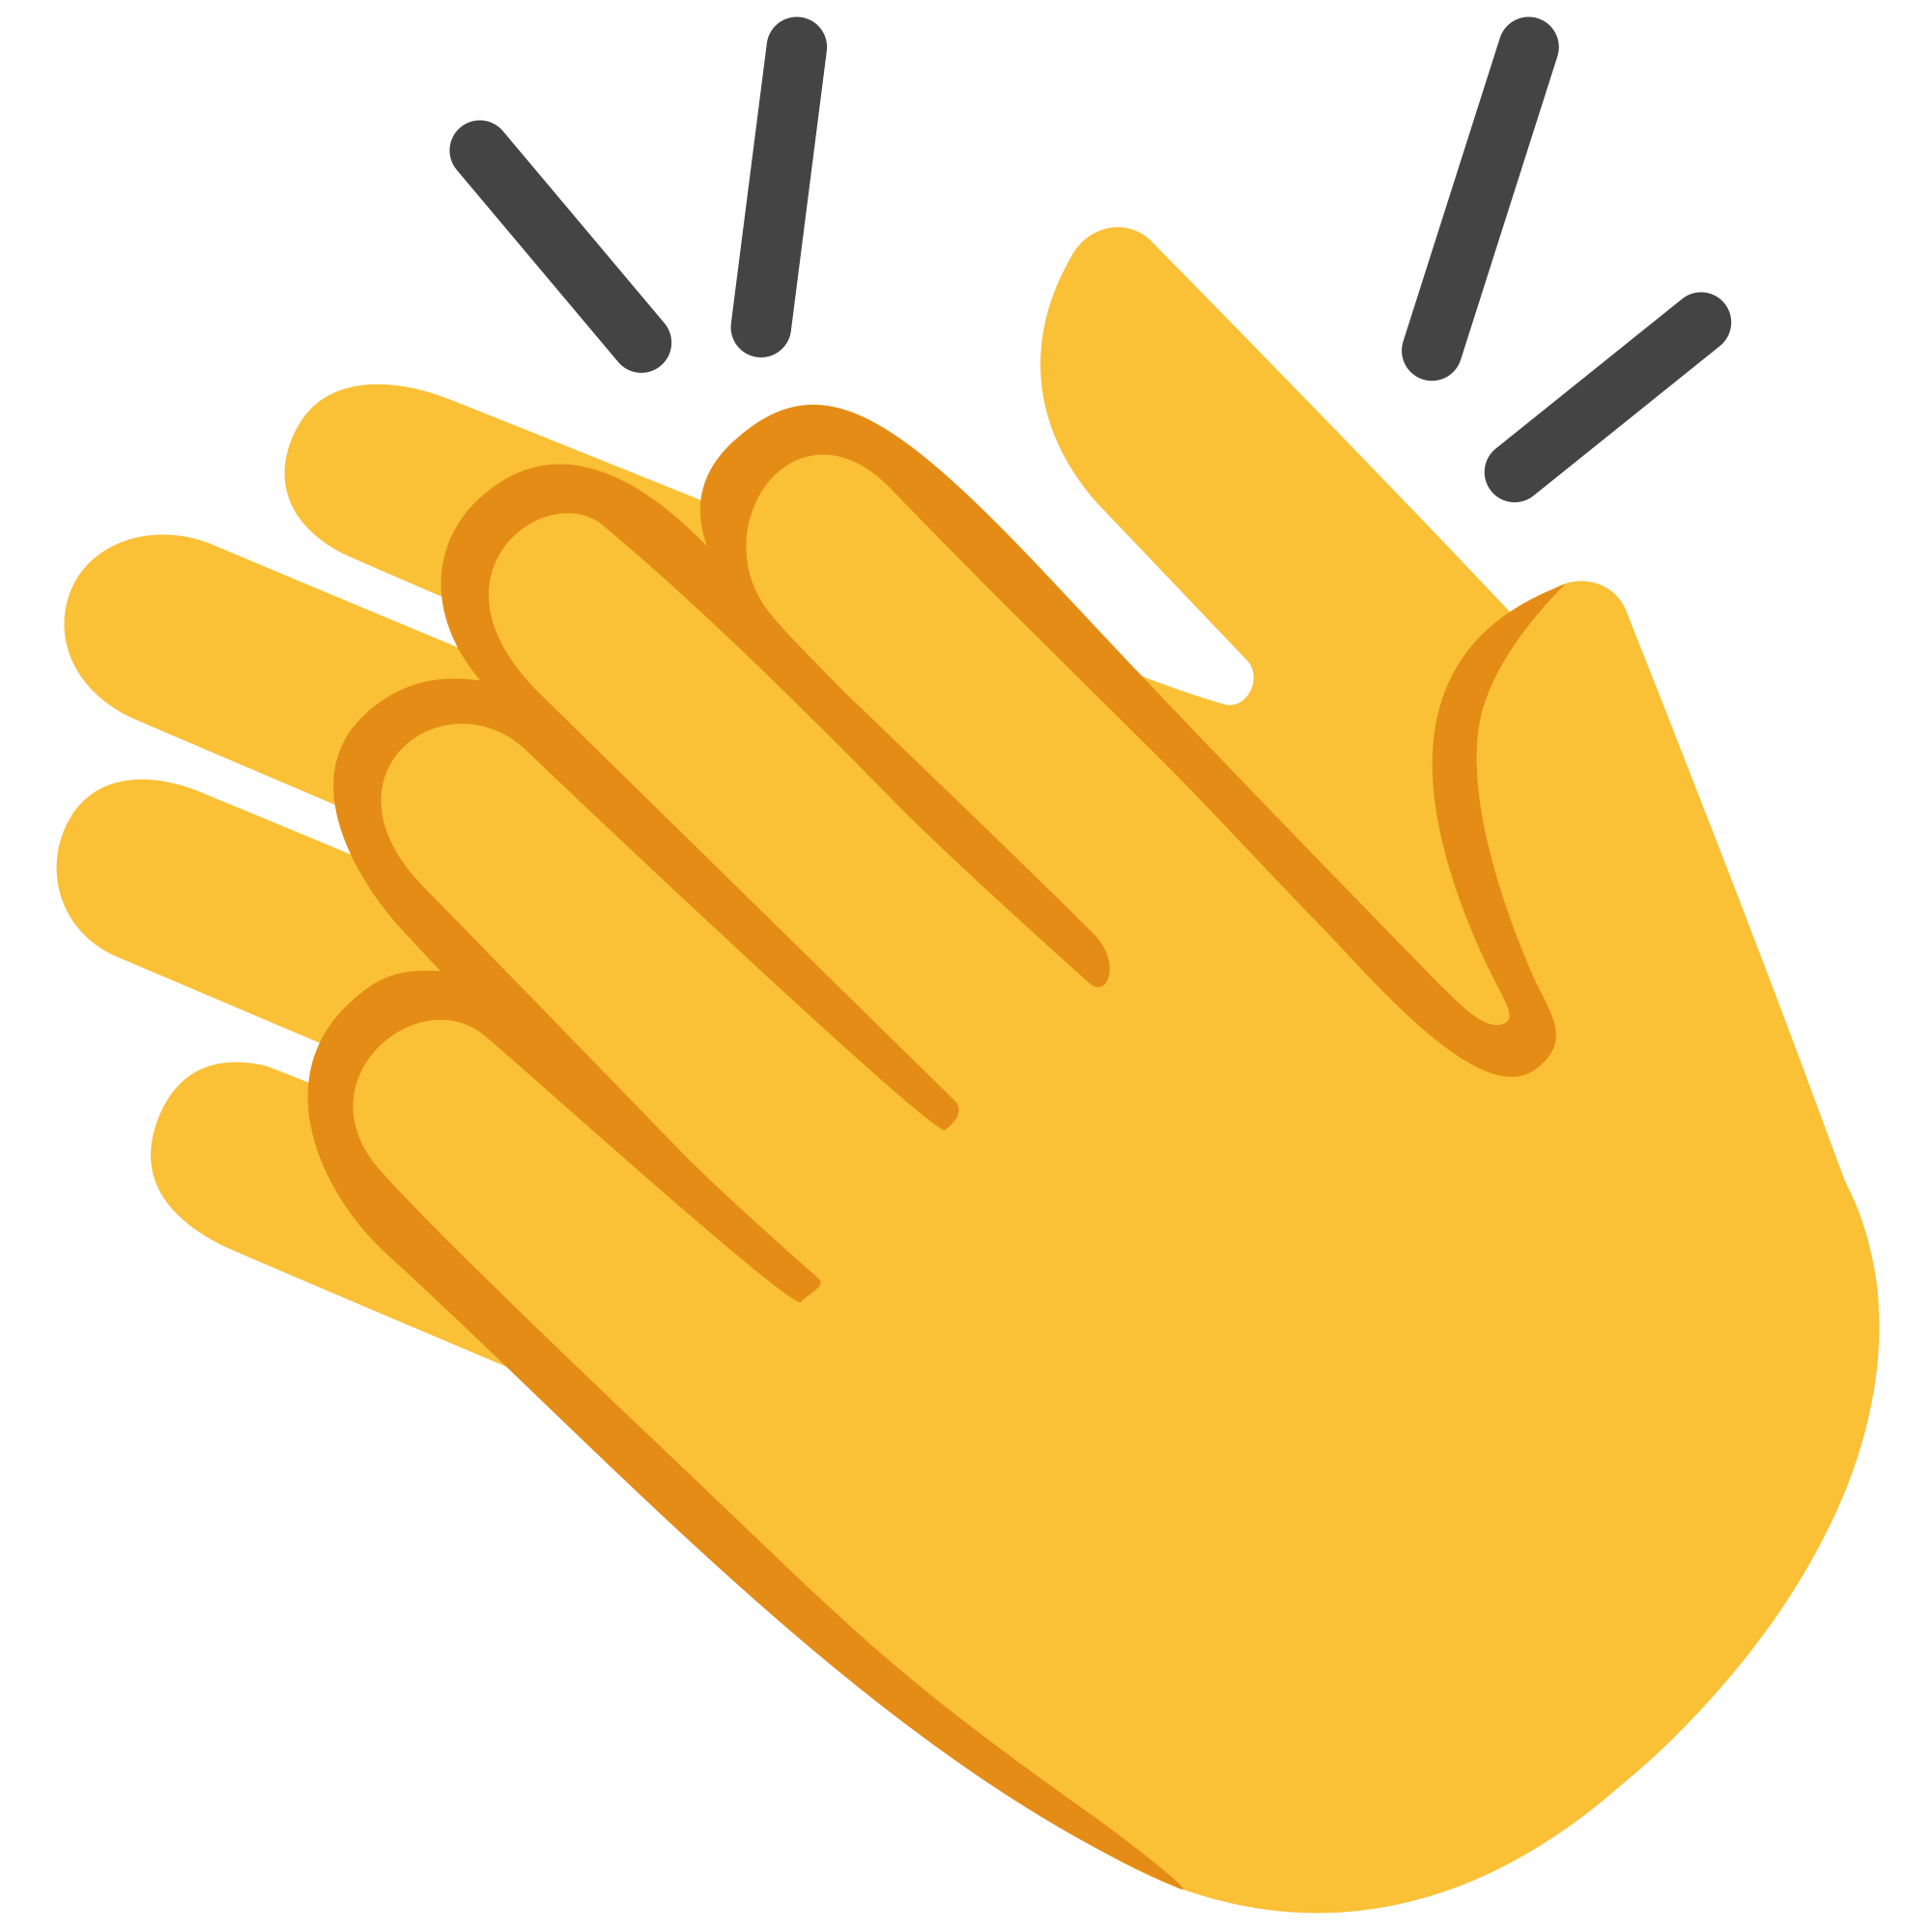 Applause Clapping Fonts Hand Noto Emoji PNG Image